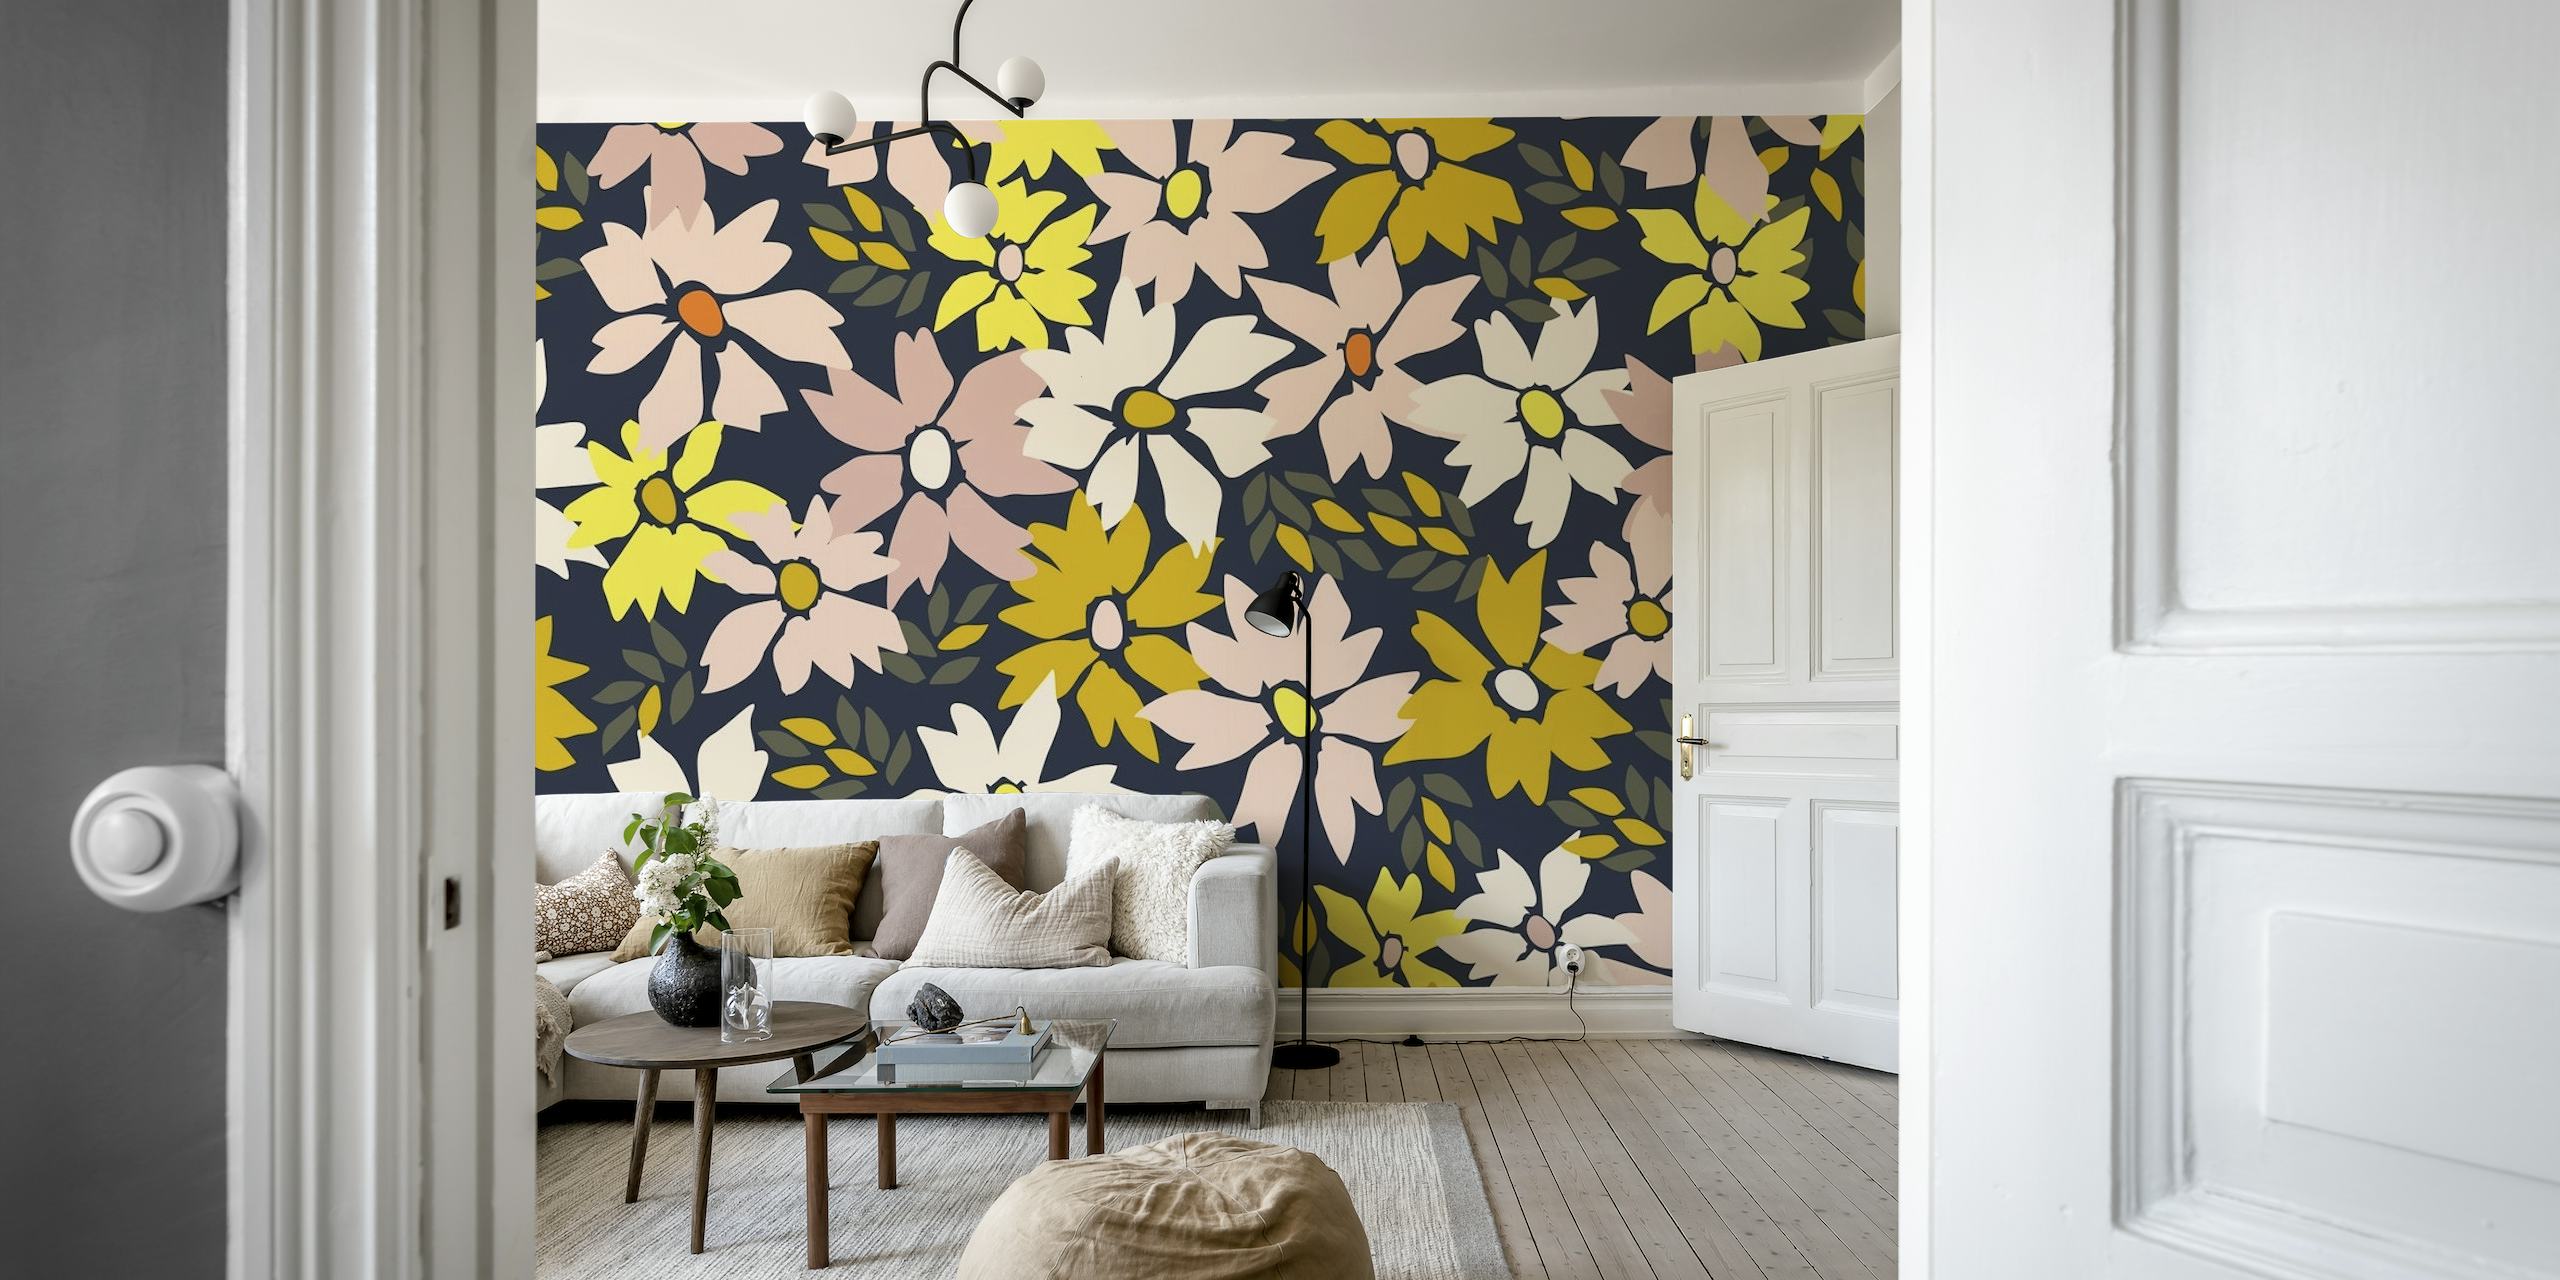 Floral wall mural with a dark background featuring an array of blossoms in soft colors